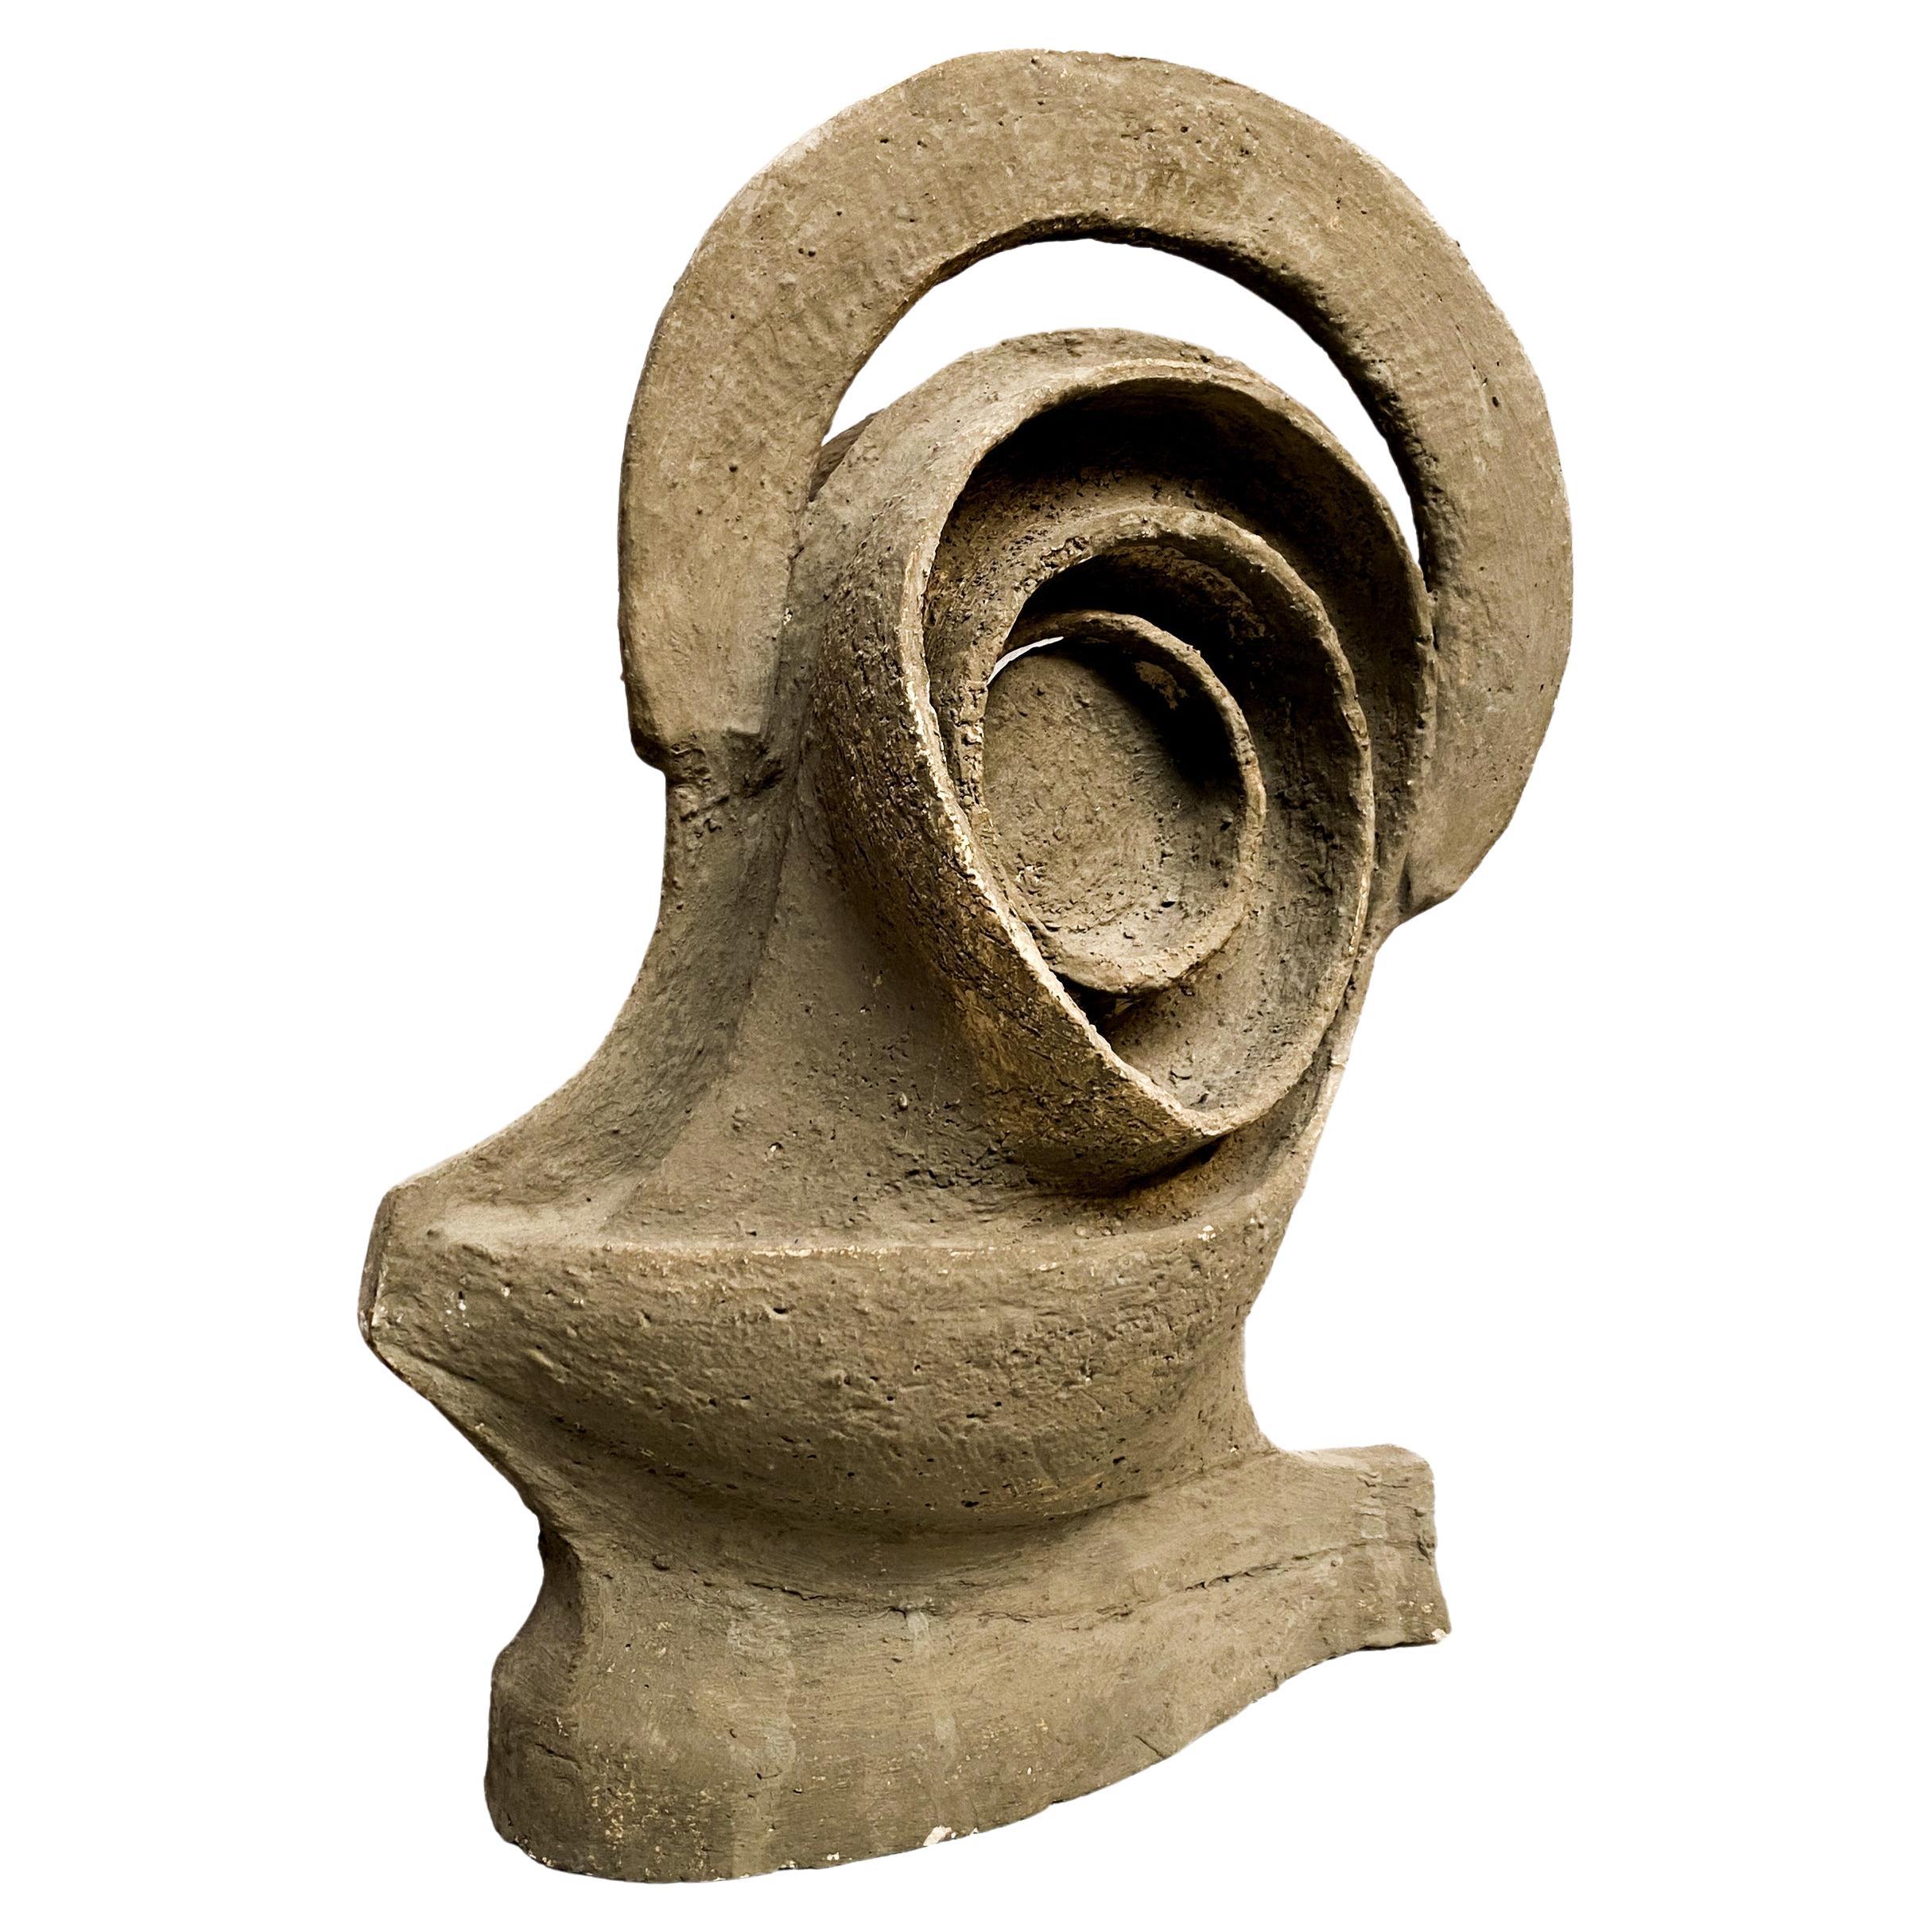 Experimental Brutalist Ceramic Sculpture in Grey Clay, 1970’s For Sale